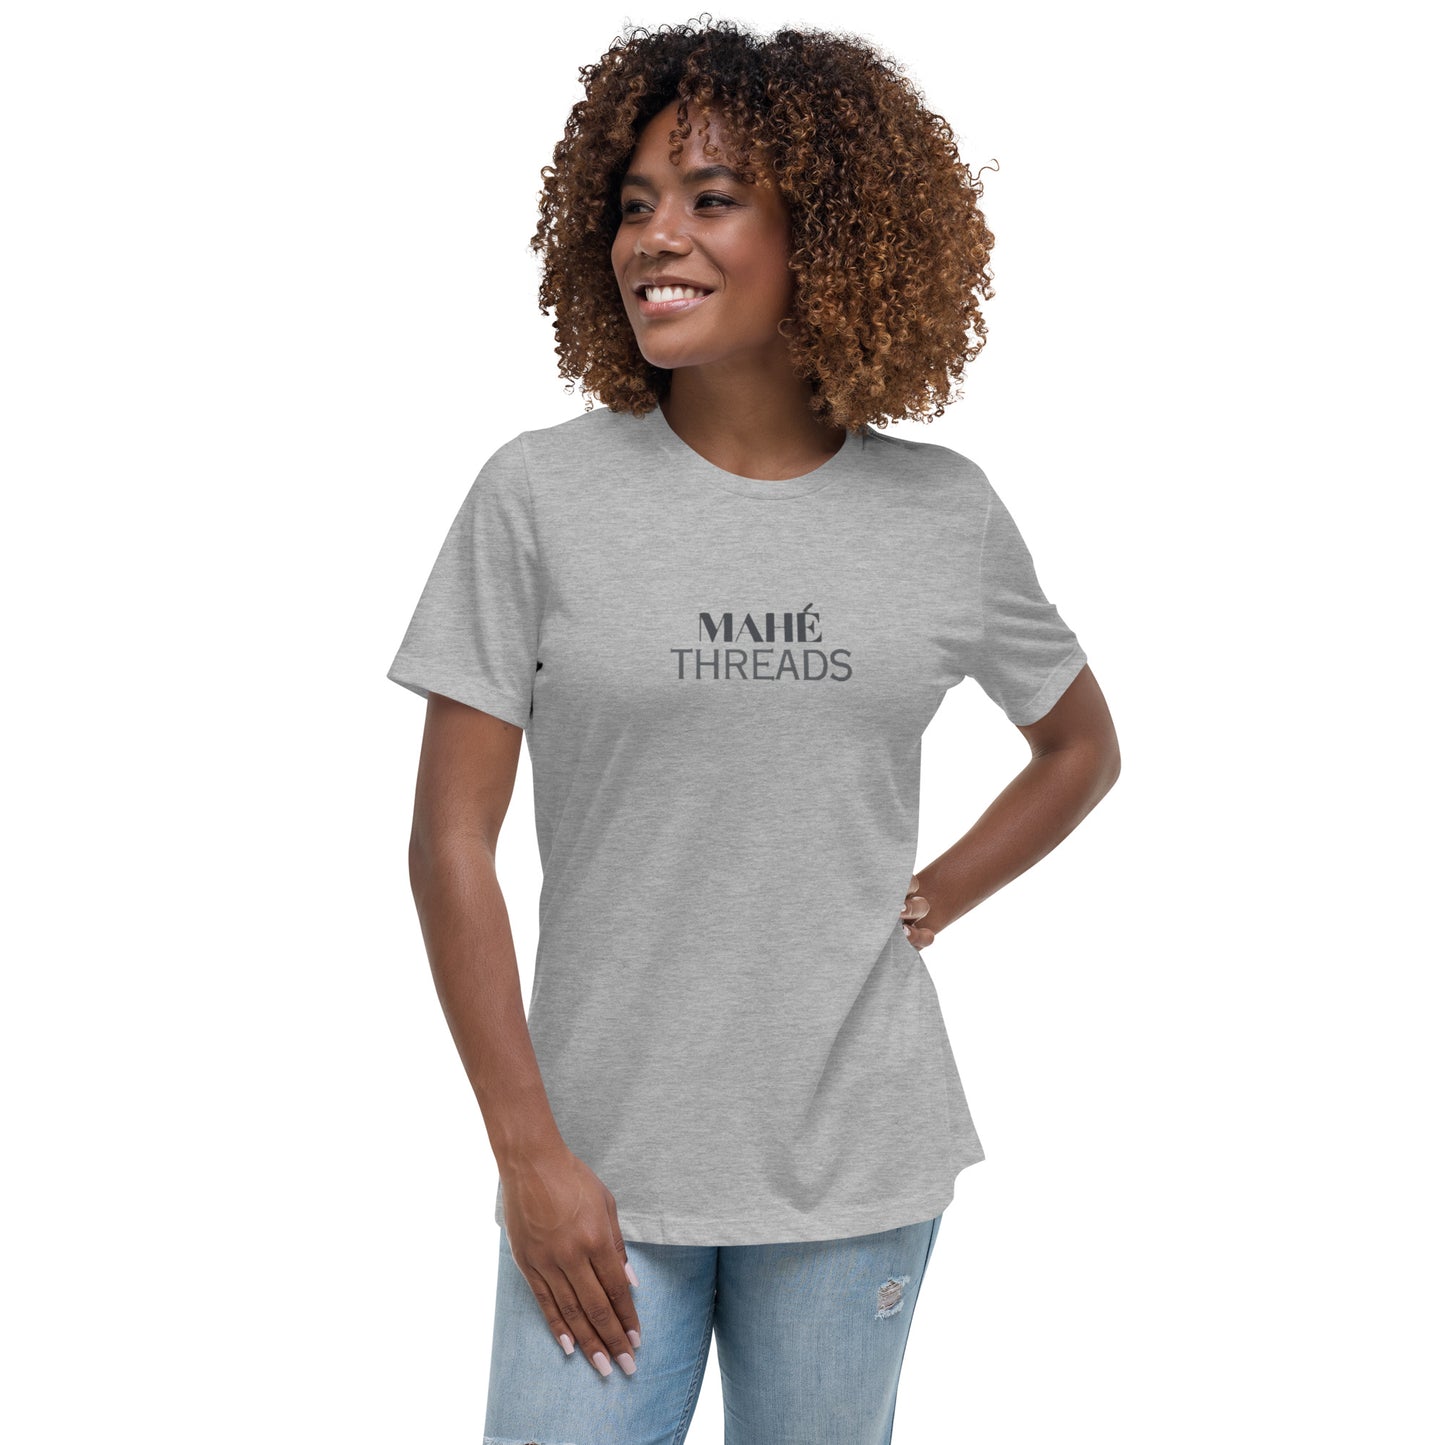 Women's Relaxed Fit Tee